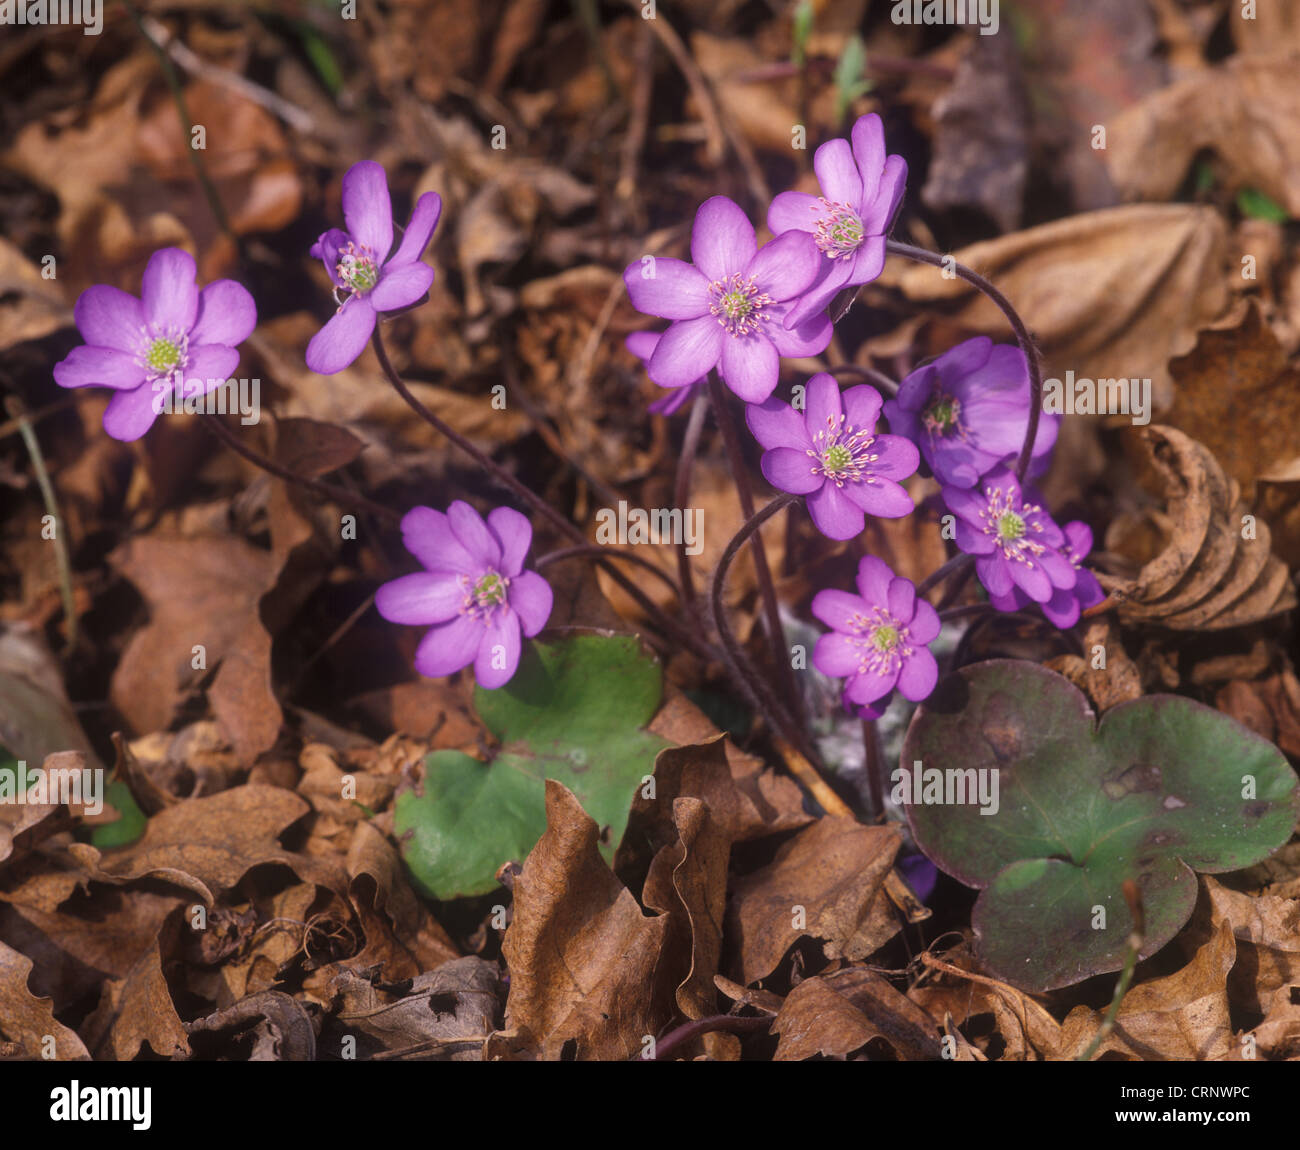 Flower - Liverwort (Anemone hepatica) Close-up of clump in flower / dead leaves Stock Photo